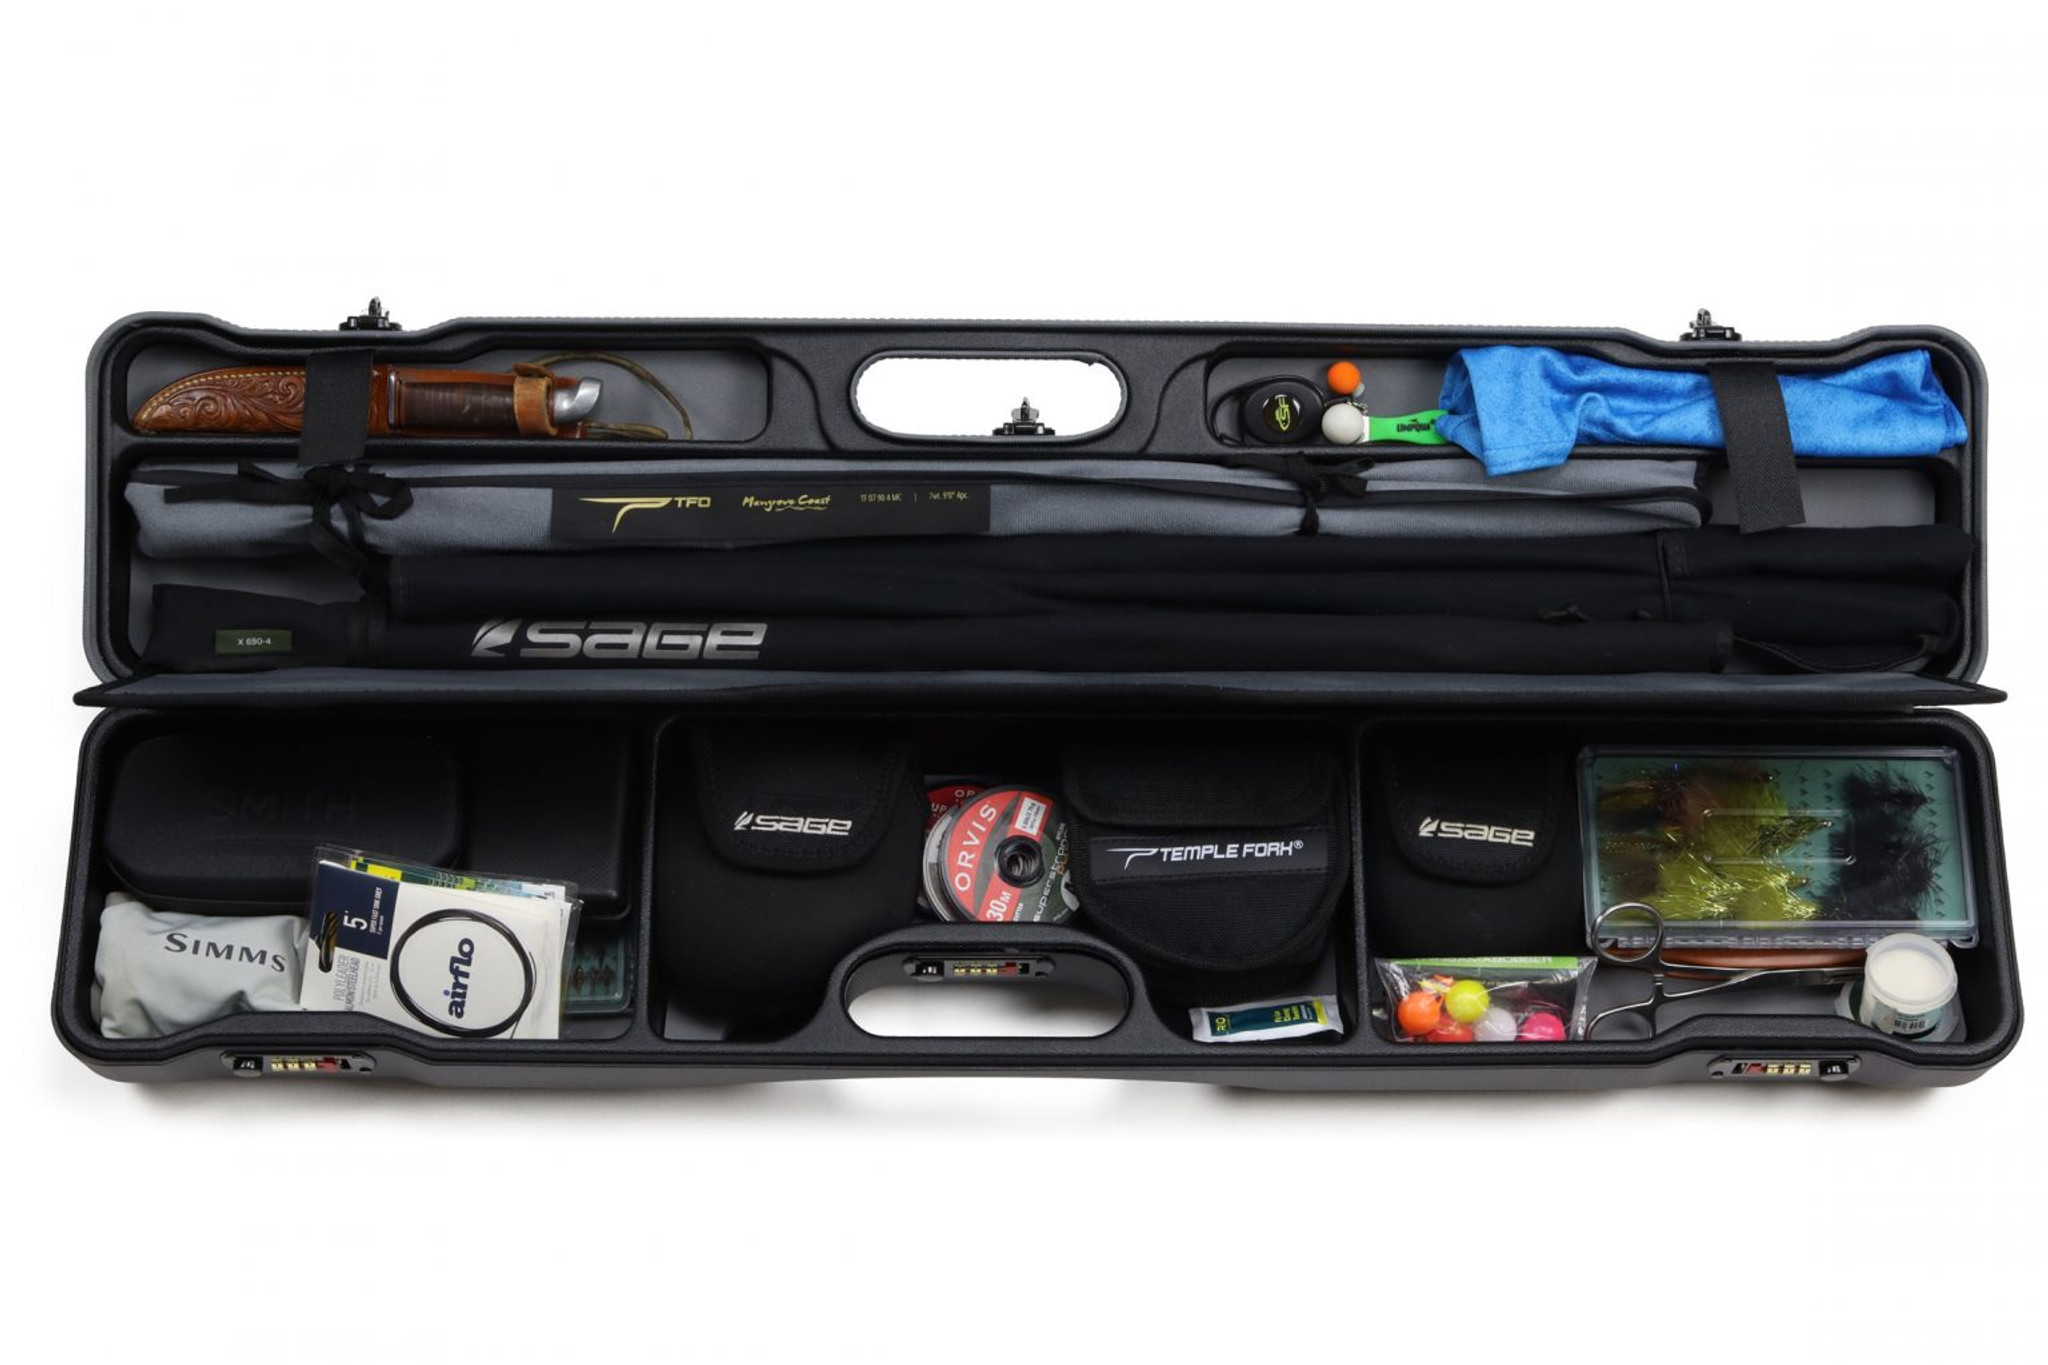 Norfork Classic QR Expedition Fly Fishing Rod and Reel Travel Case - 9' 6 Rod